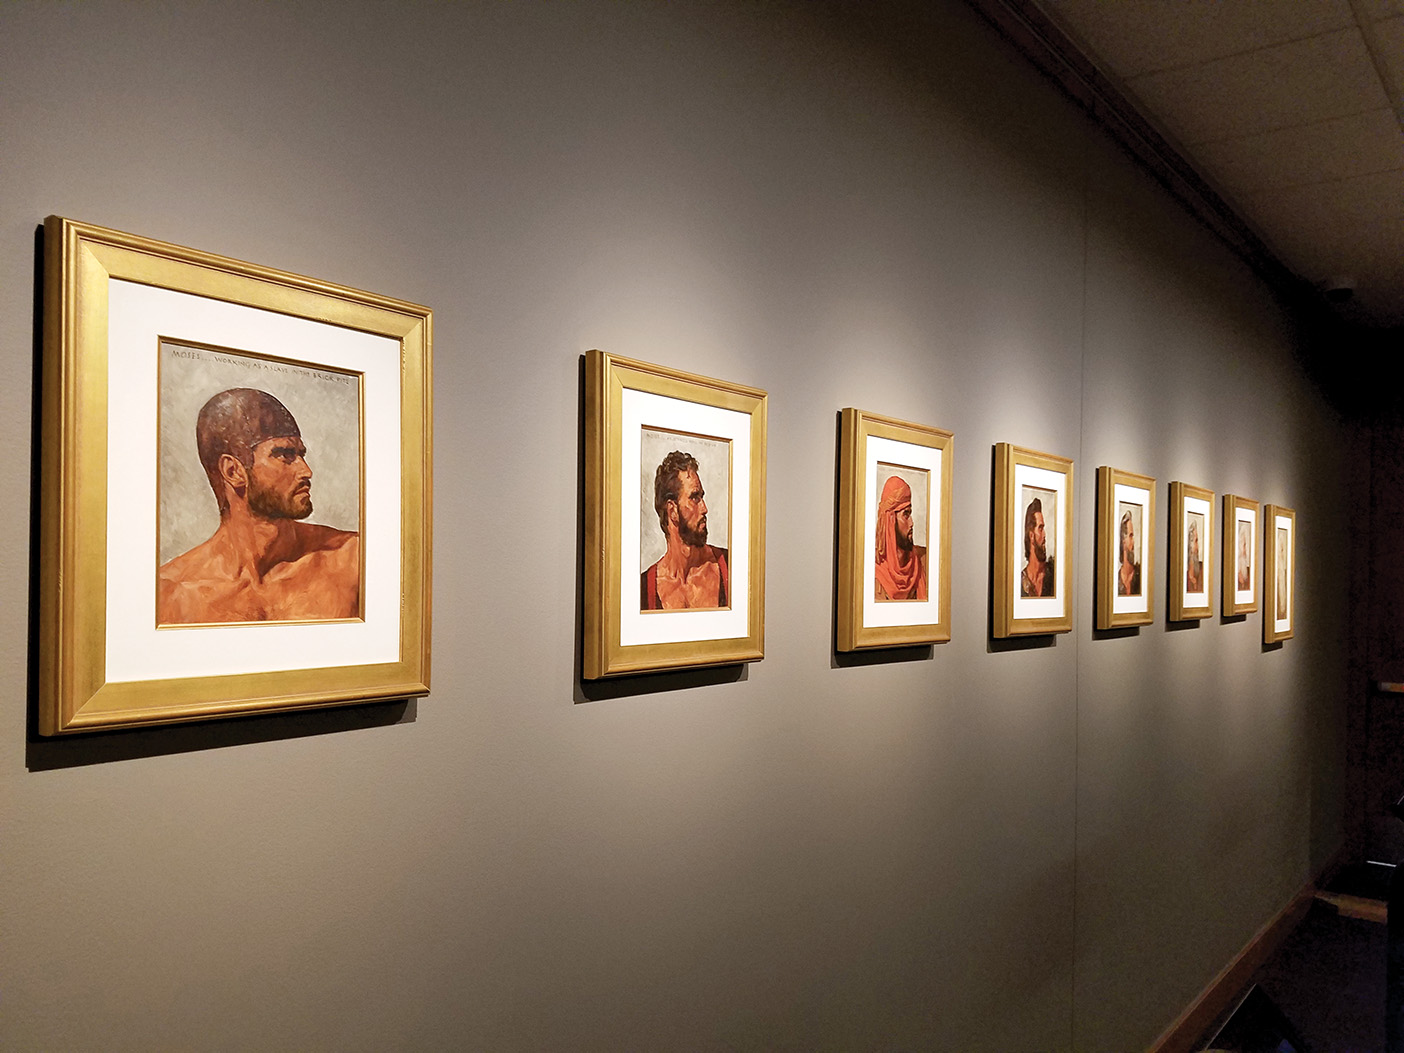 A line of portraits along the wall showing a man's head.